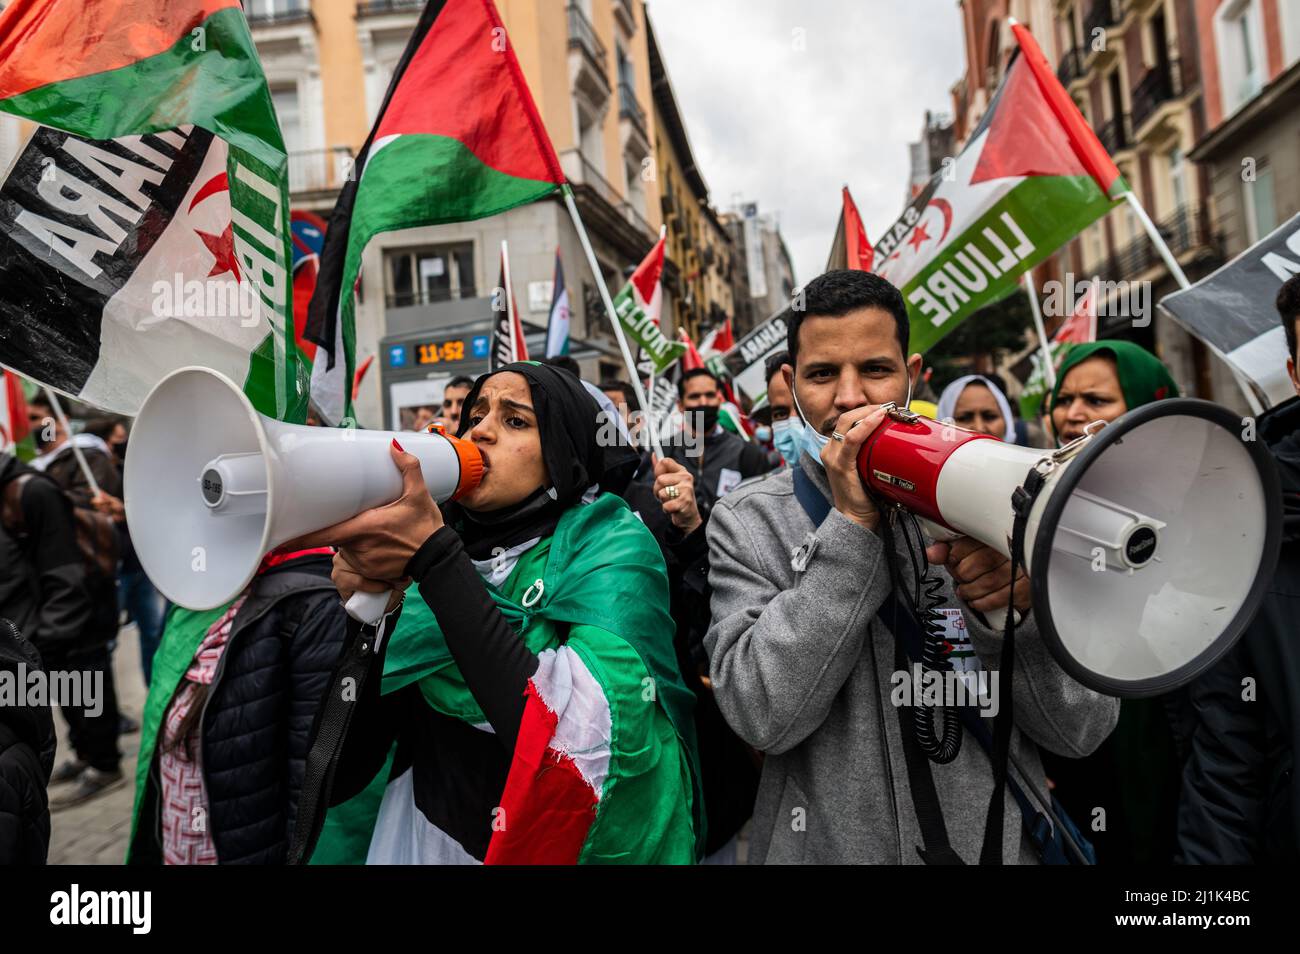 Madrid, Spain. 26th Mar, 2022. Saharawi community and supporters are seen with flags shouting slogans during a demonstration in front of the Ministry of Foreign Affairs. Thousands have gathered to protest against the Spanish government's support for Morocco's autonomy plan for Western Sahara, which grants a limited autonomy to Western Sahara. Pro-independence groups as well as Algeria oppose the proposal. Credit: Marcos del Mazo/Alamy Live News Stock Photo